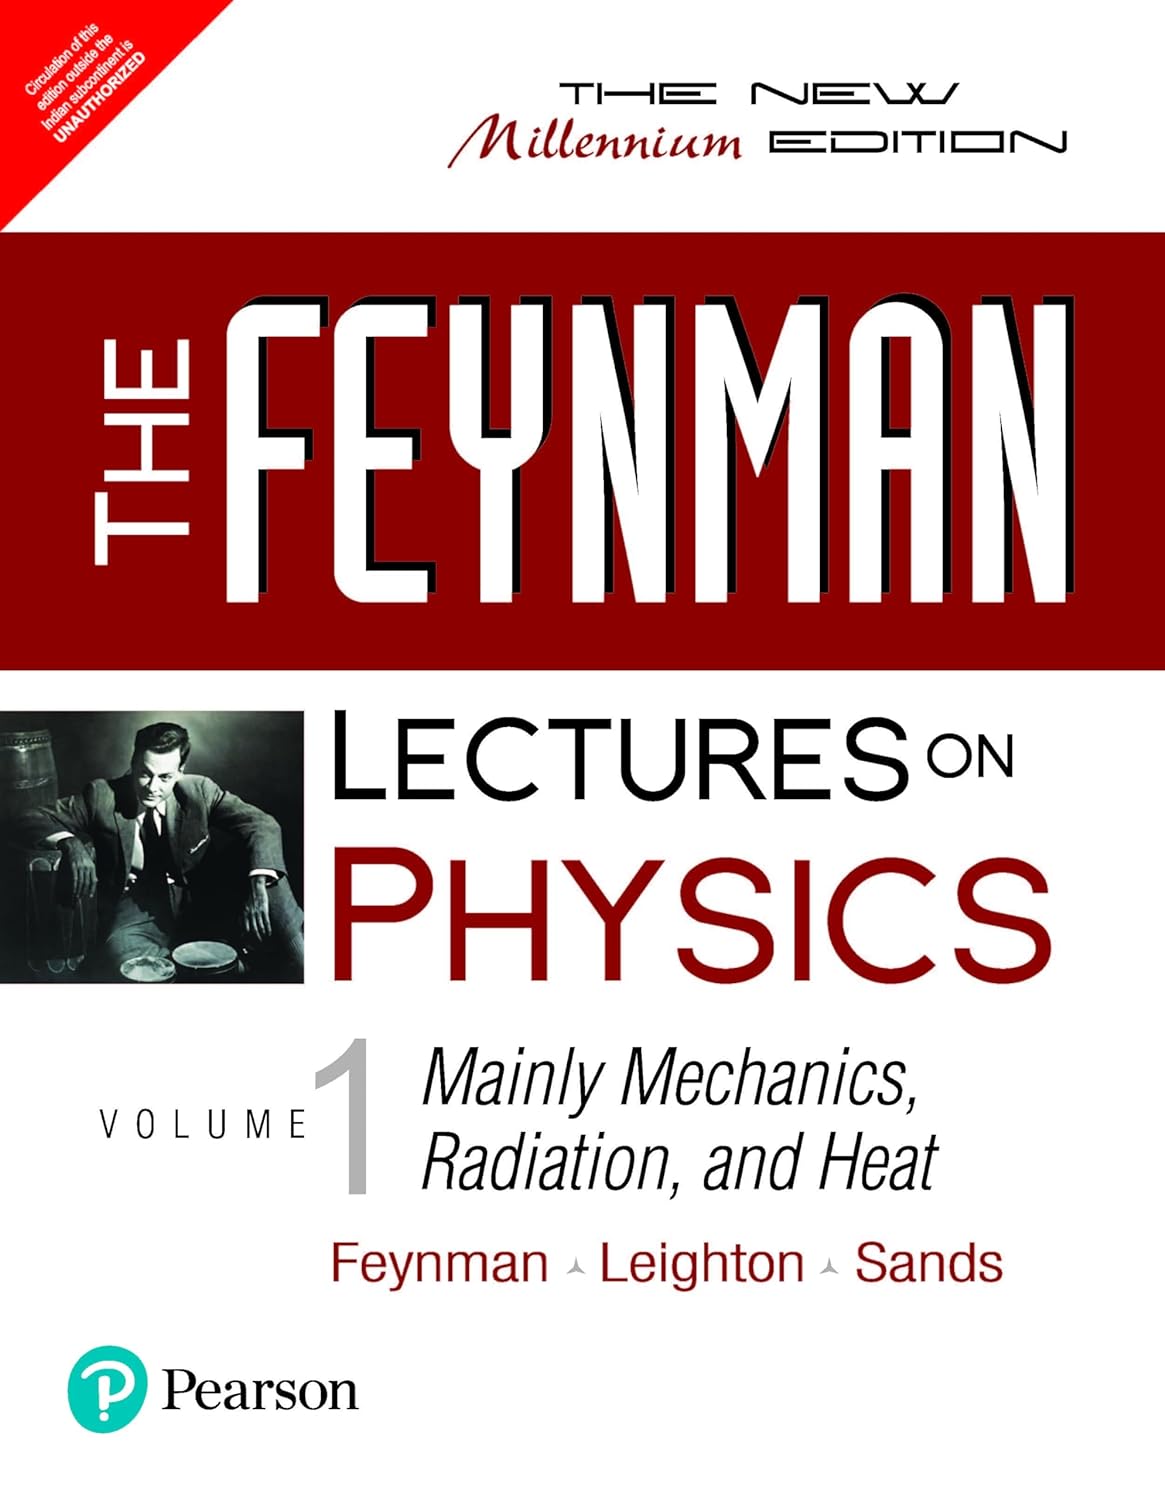 The Feynman Lectures On Physics, Vol. 1